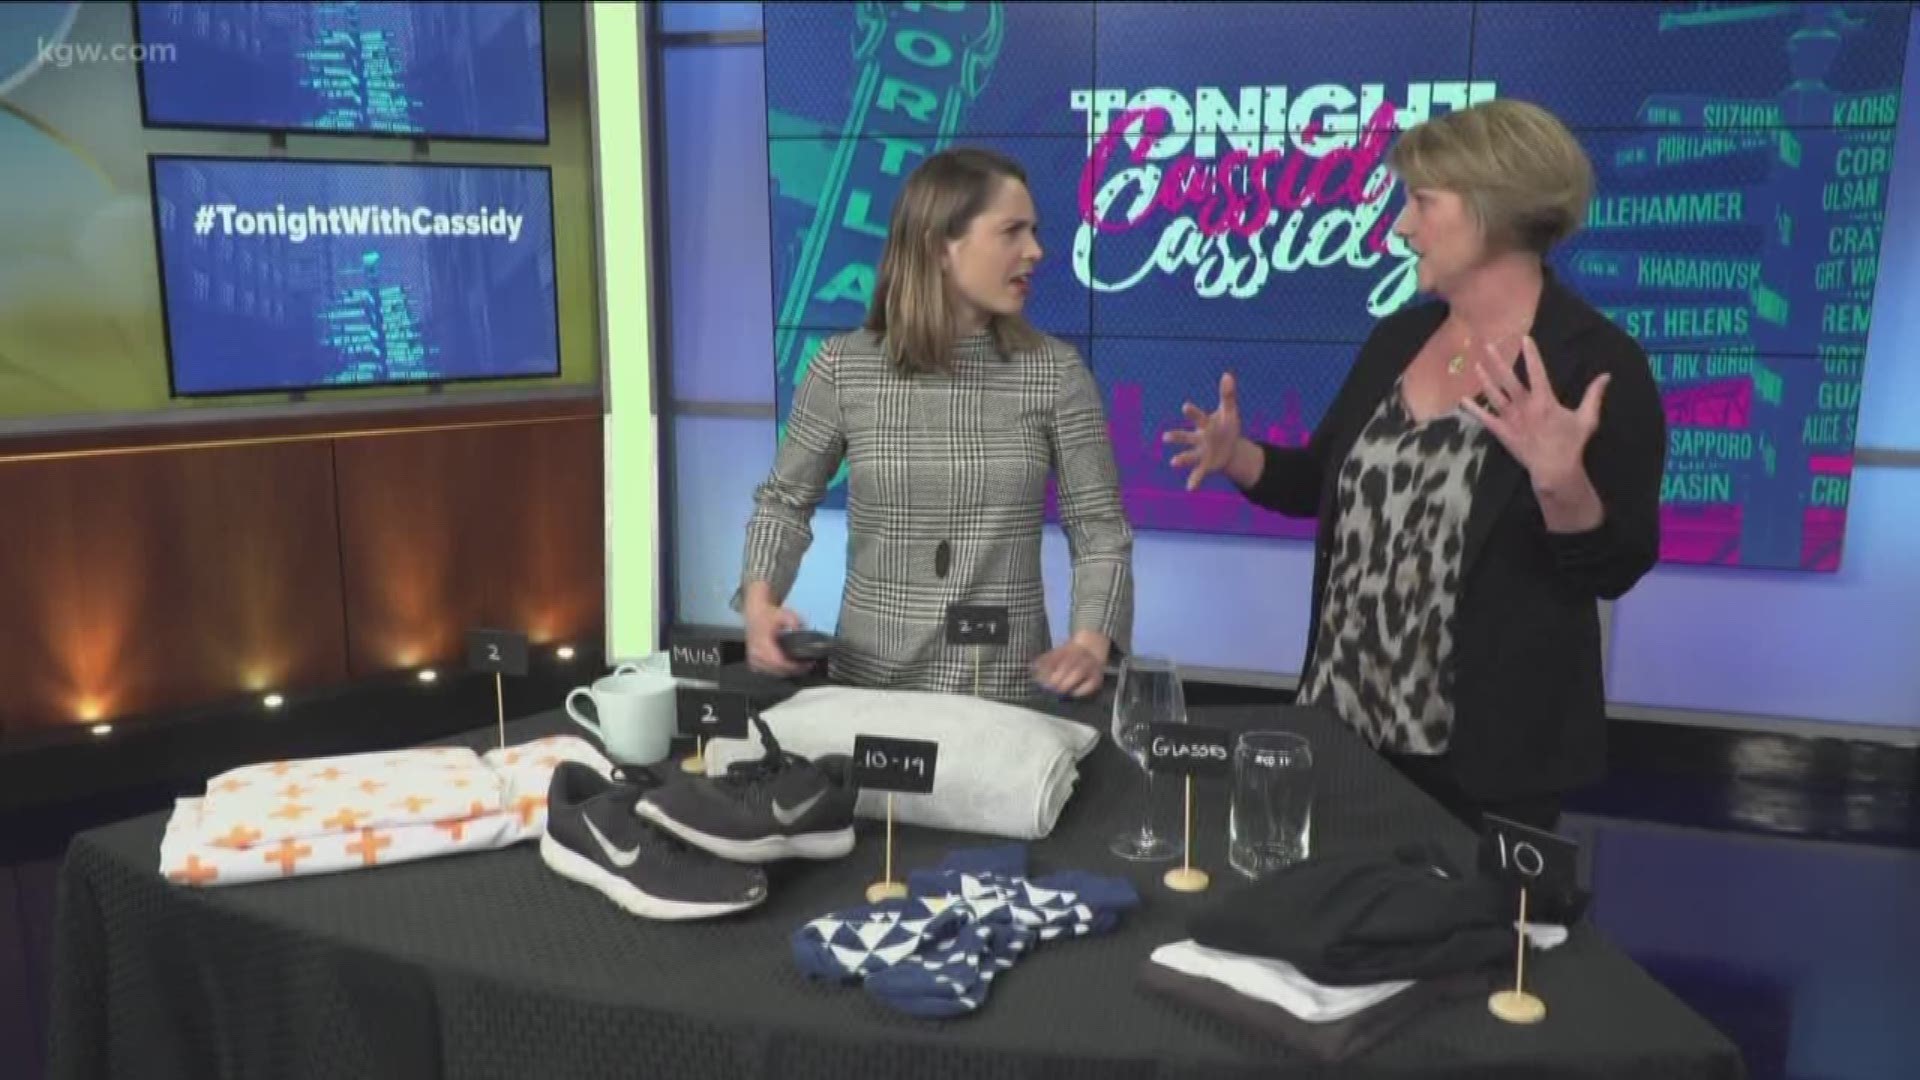 Professional organizer Michaela Santen reveals how much is too much when it comes to being organized.
simple-sweep.com
#TonightwithCassidy